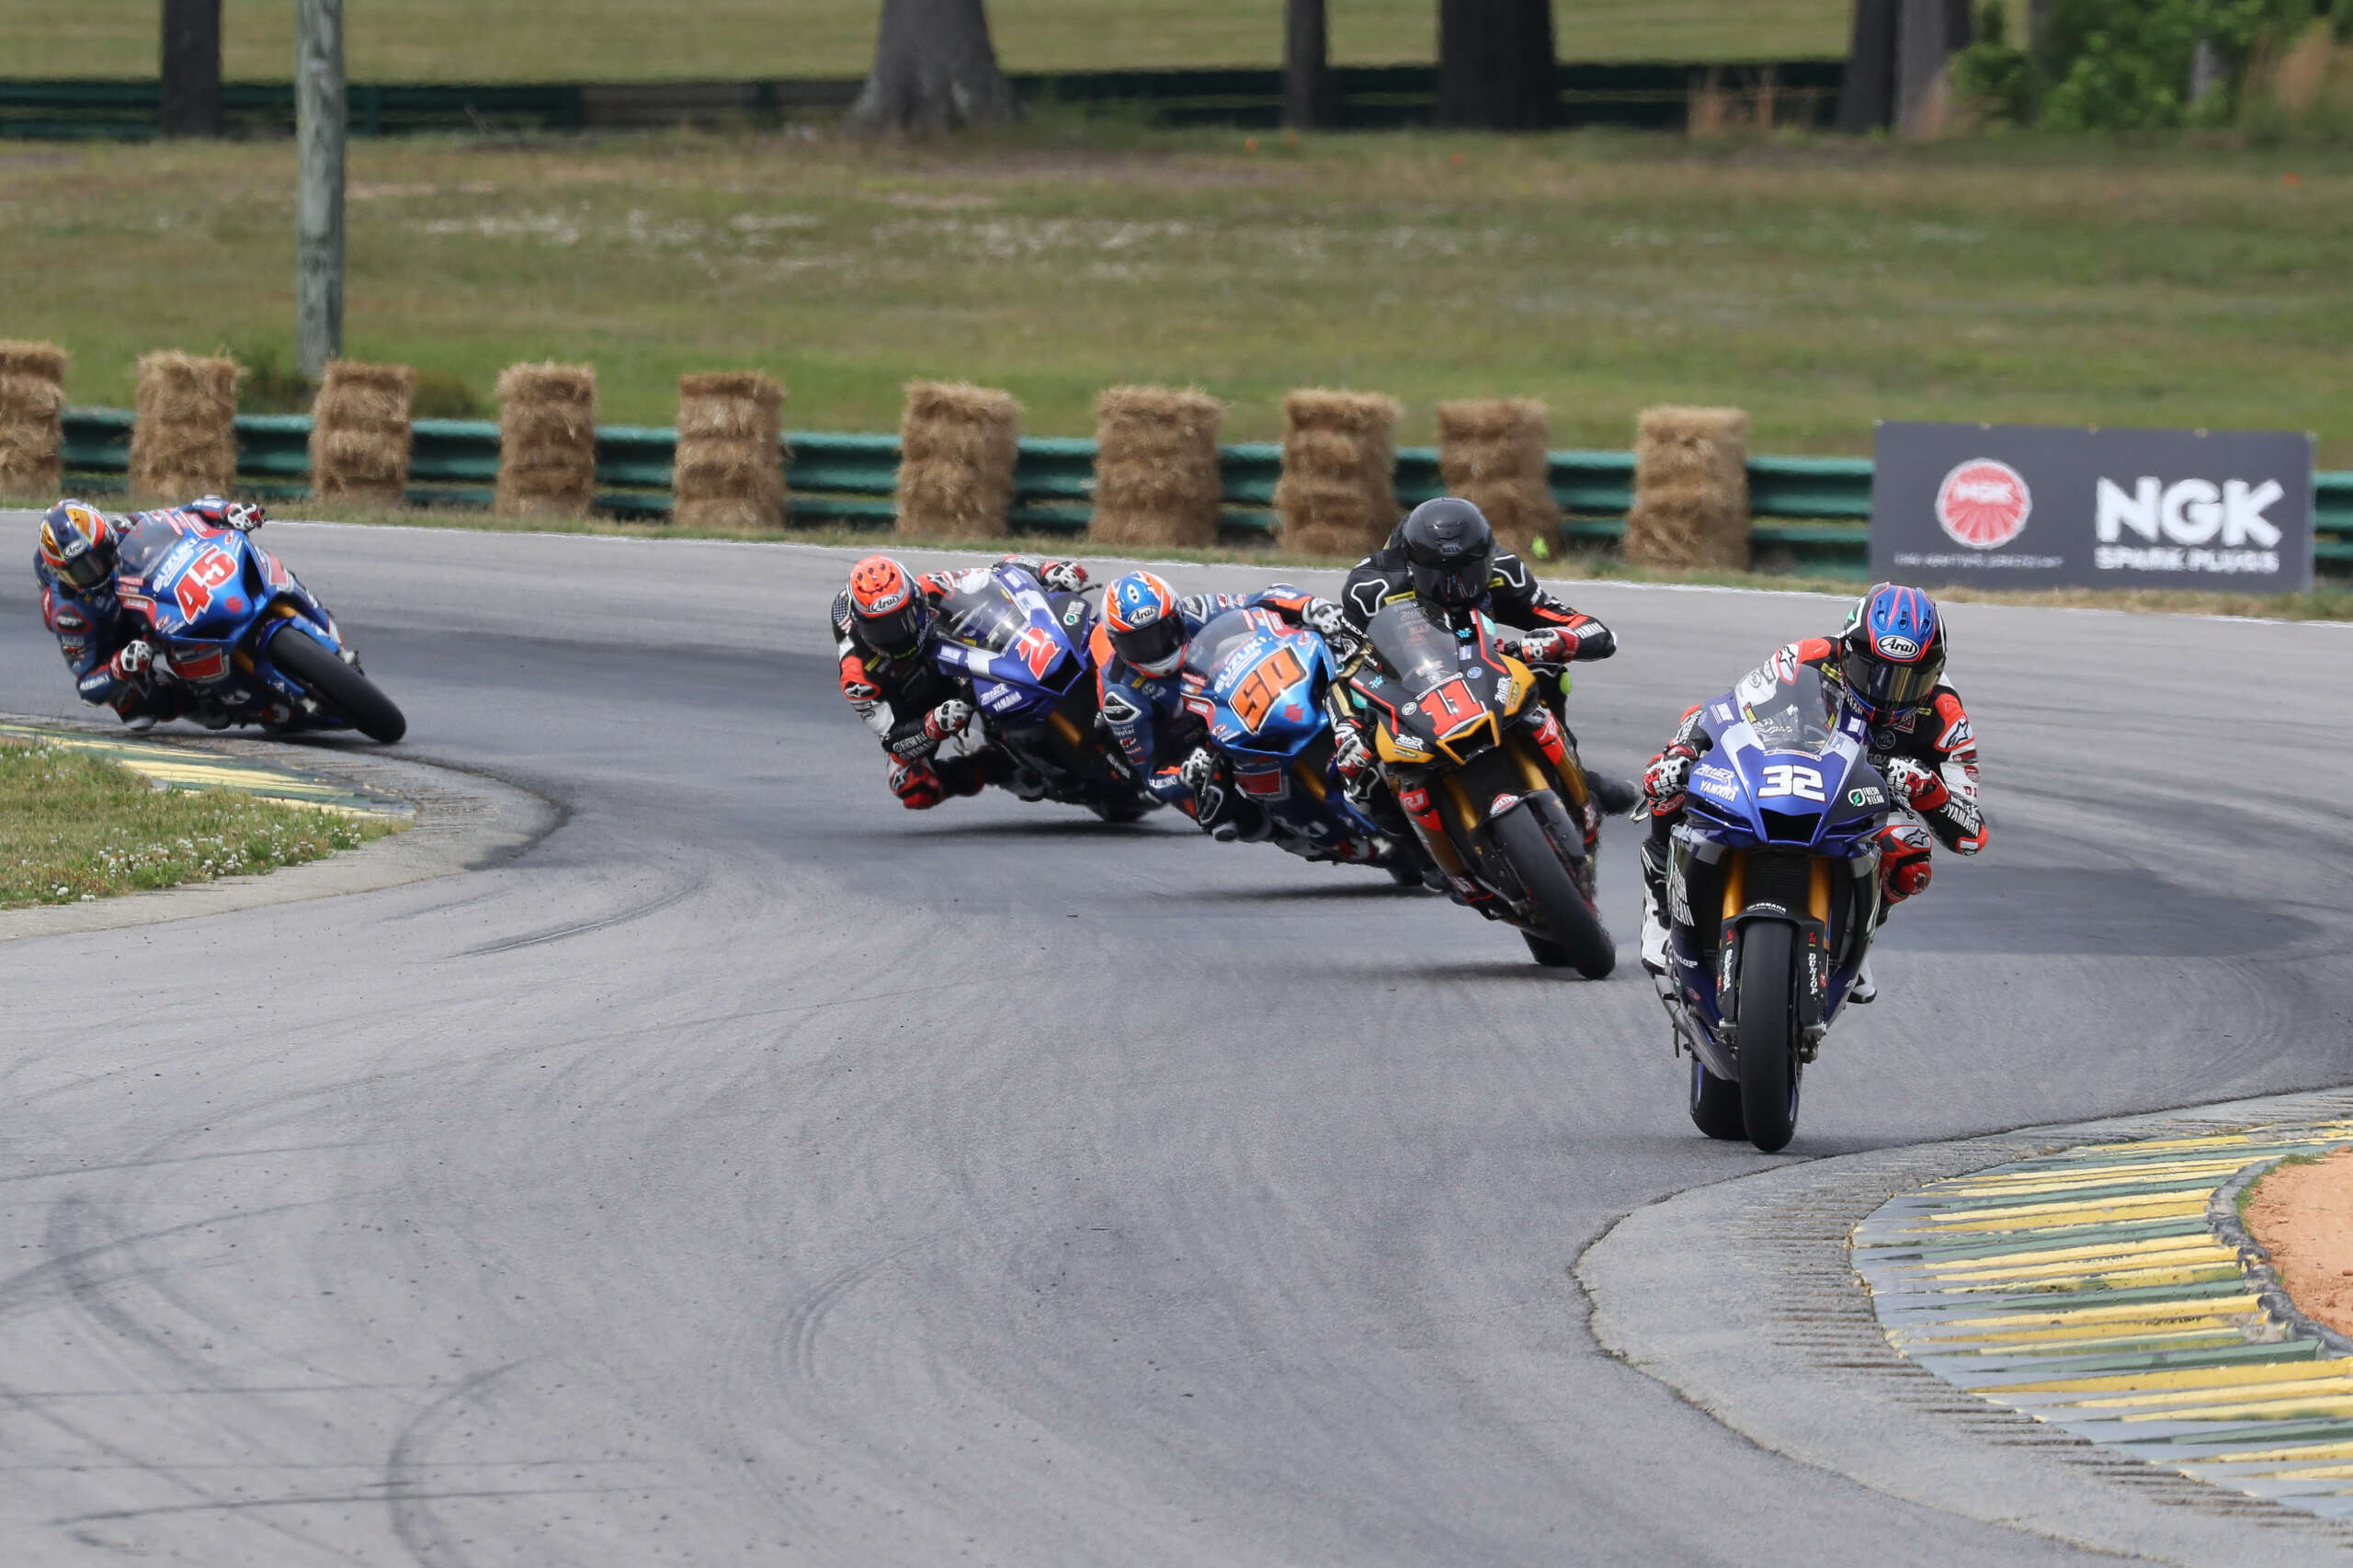 Gagne Gets It Done In Race One At VIR